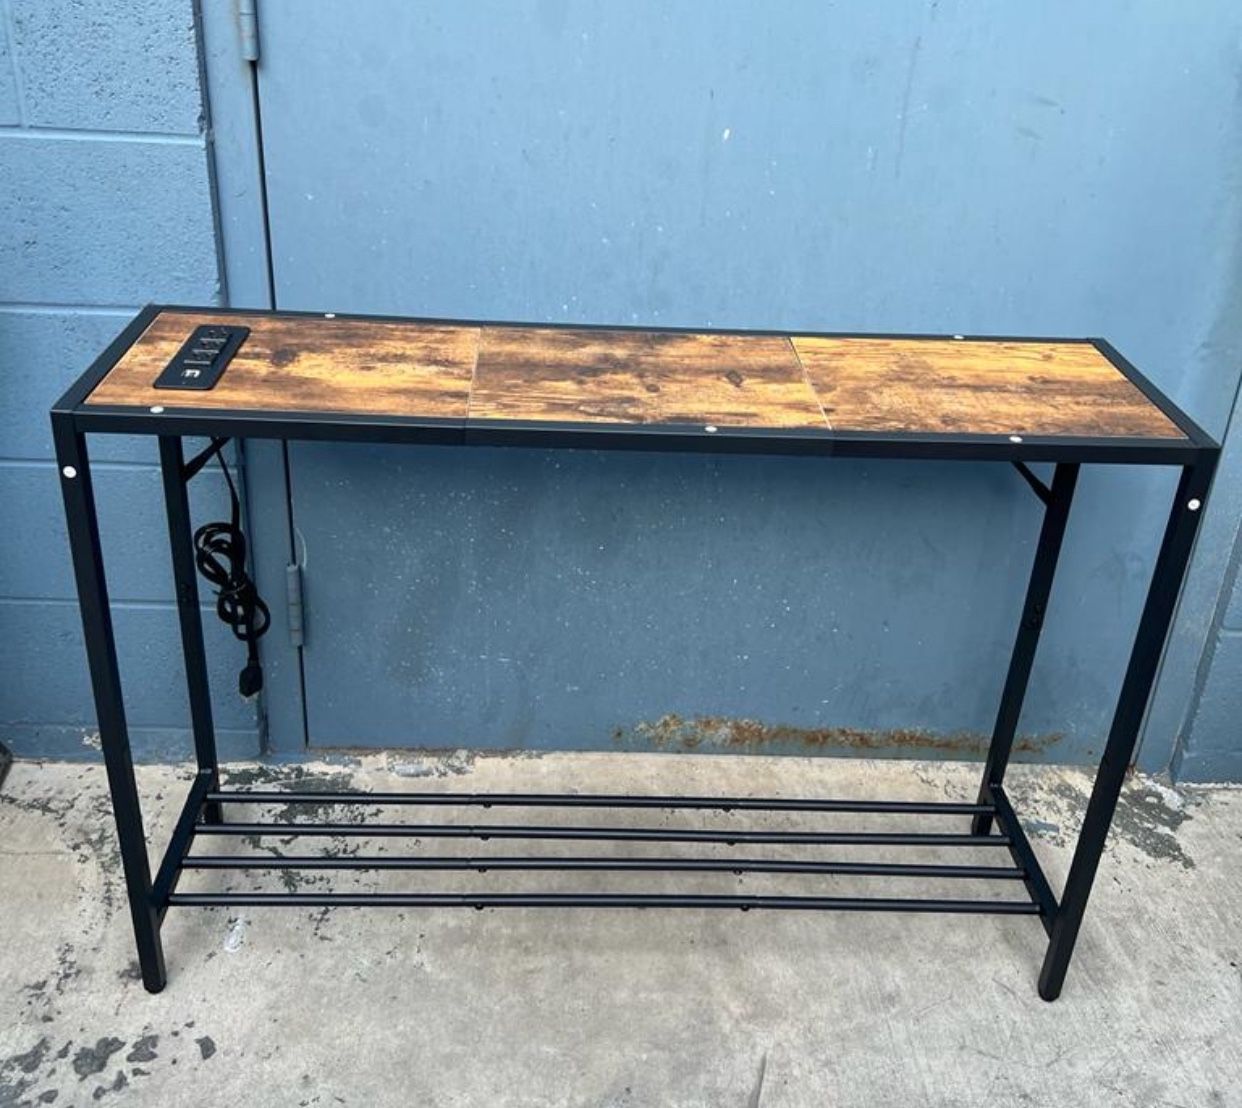 Console Table Brand New $35 Each 10 Available 